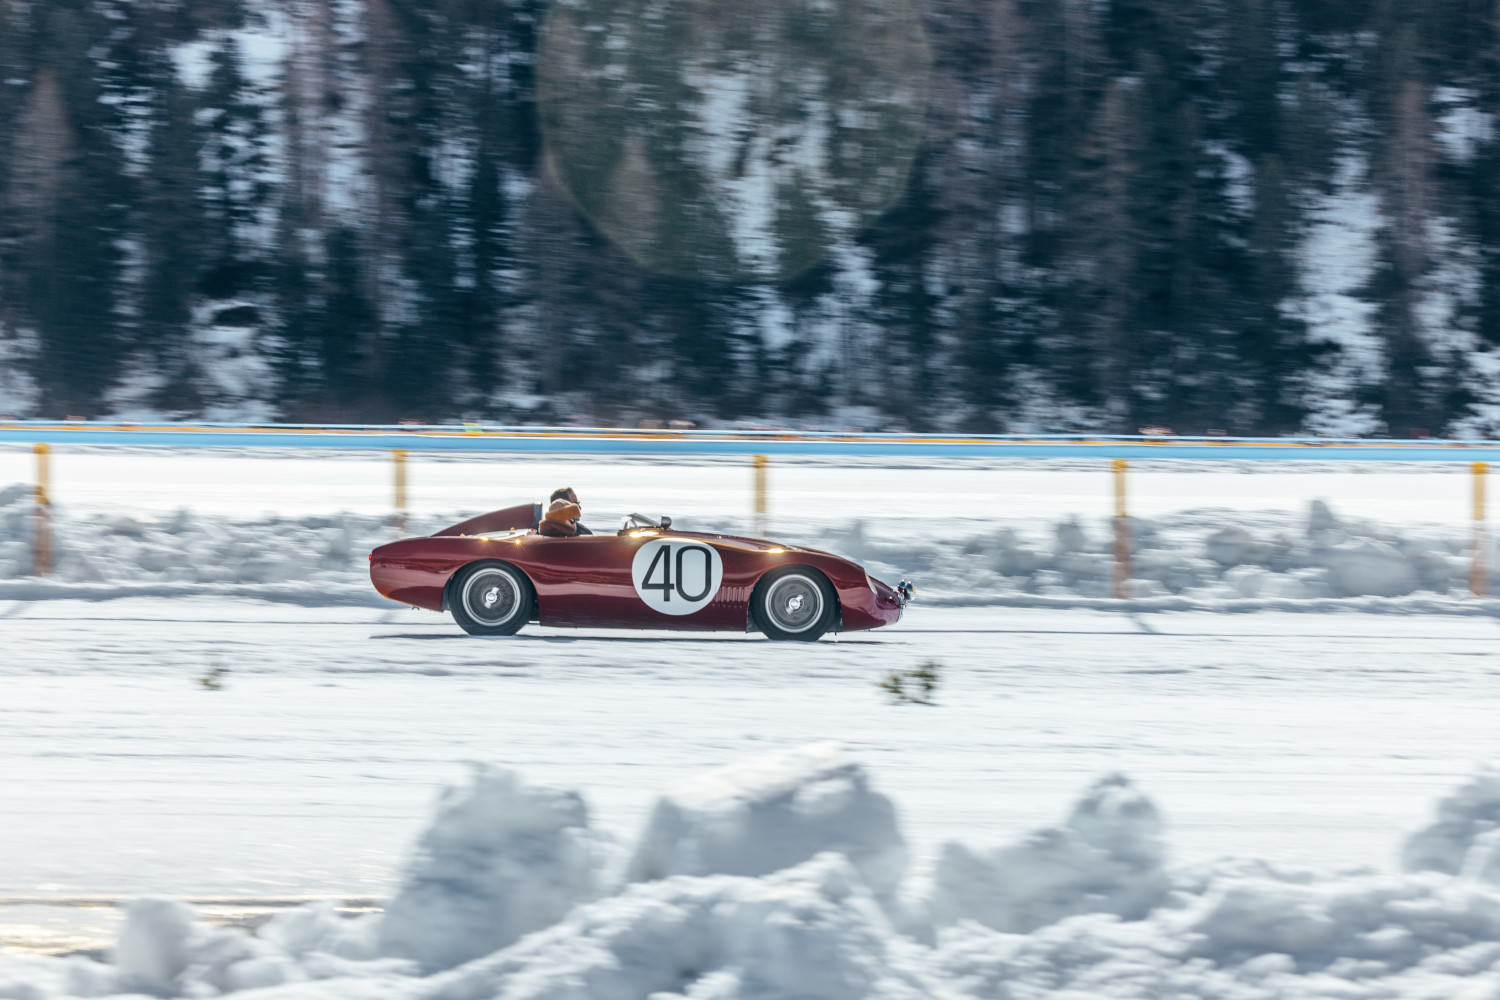 the,ice,event,in,st.moritz,with,a,oldtimer,on,track